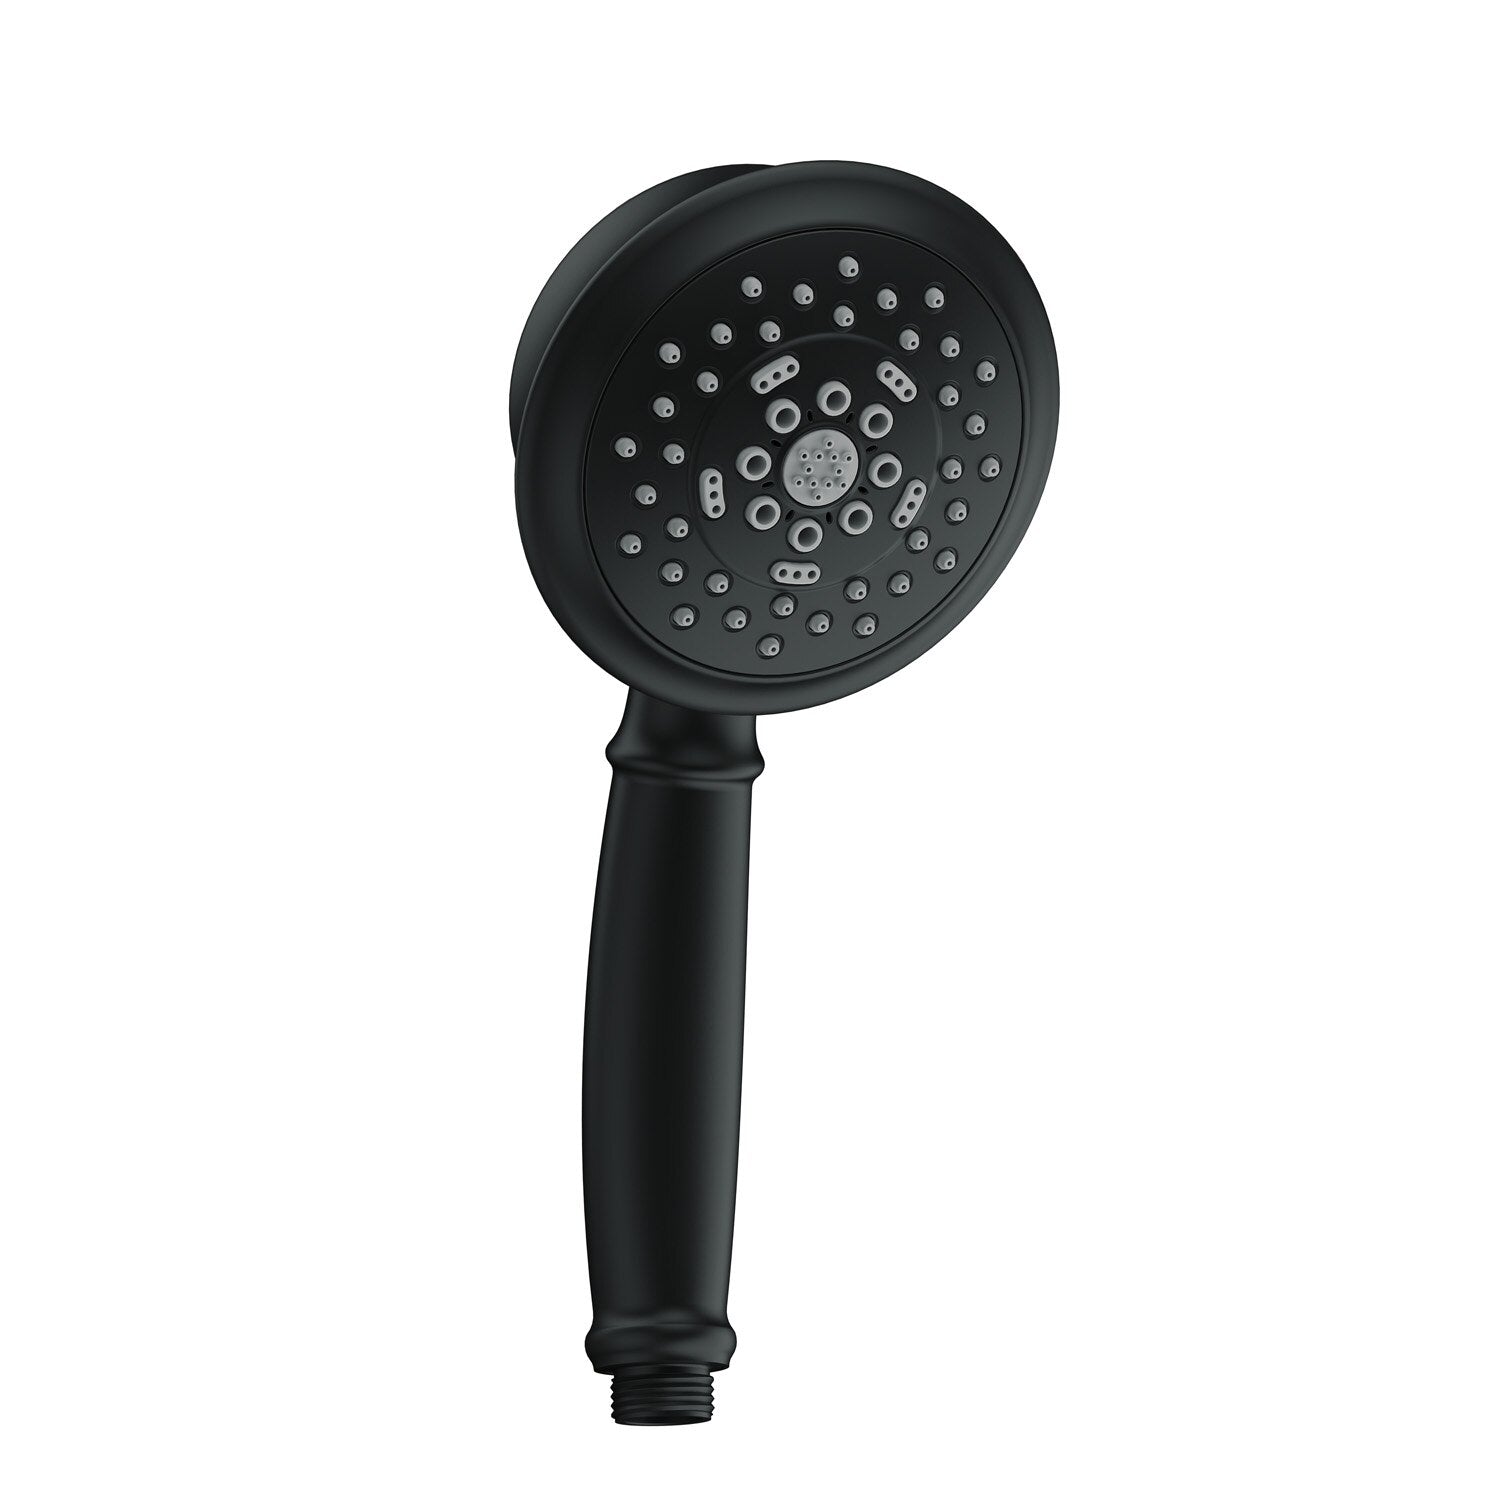 Danze by Gerber Surge 5 Function Handshower 2.0gpm